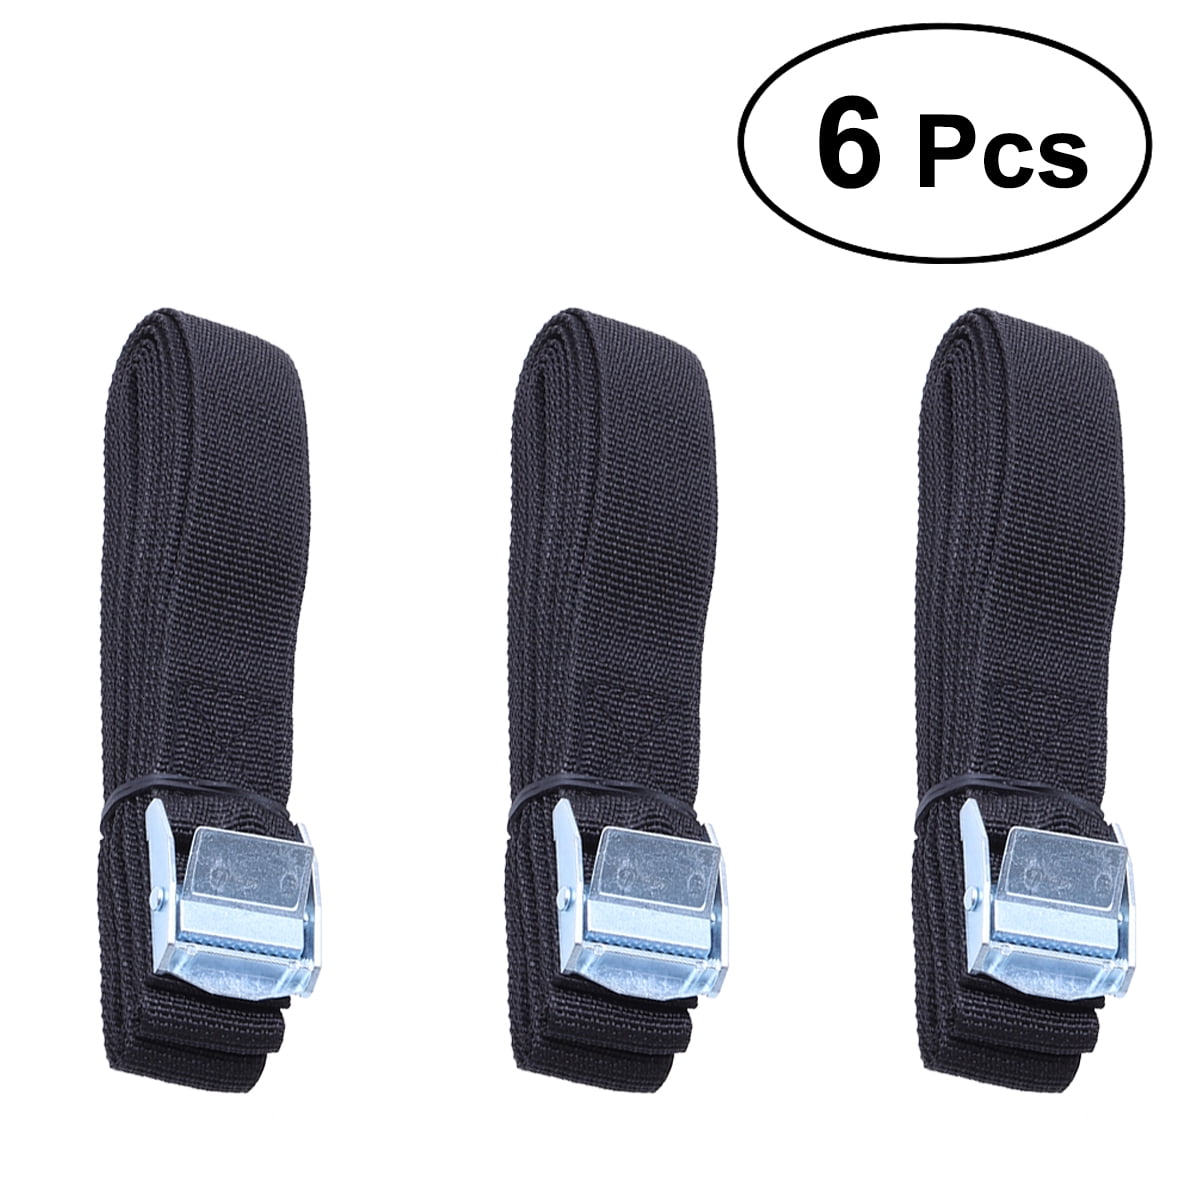 Moving Canoes Kayak LTD 1-inch-16ft-For RV Xiangle Premium Quality Cam Buckle Lashing Straps with Rubber Protector T&HI-B07DVZ545Z Break Strength 550lbs 1, 16ft ZHANGJIAGANG CITY XIANGLE TOOL CO Roof Racks and Boat 6pcs 